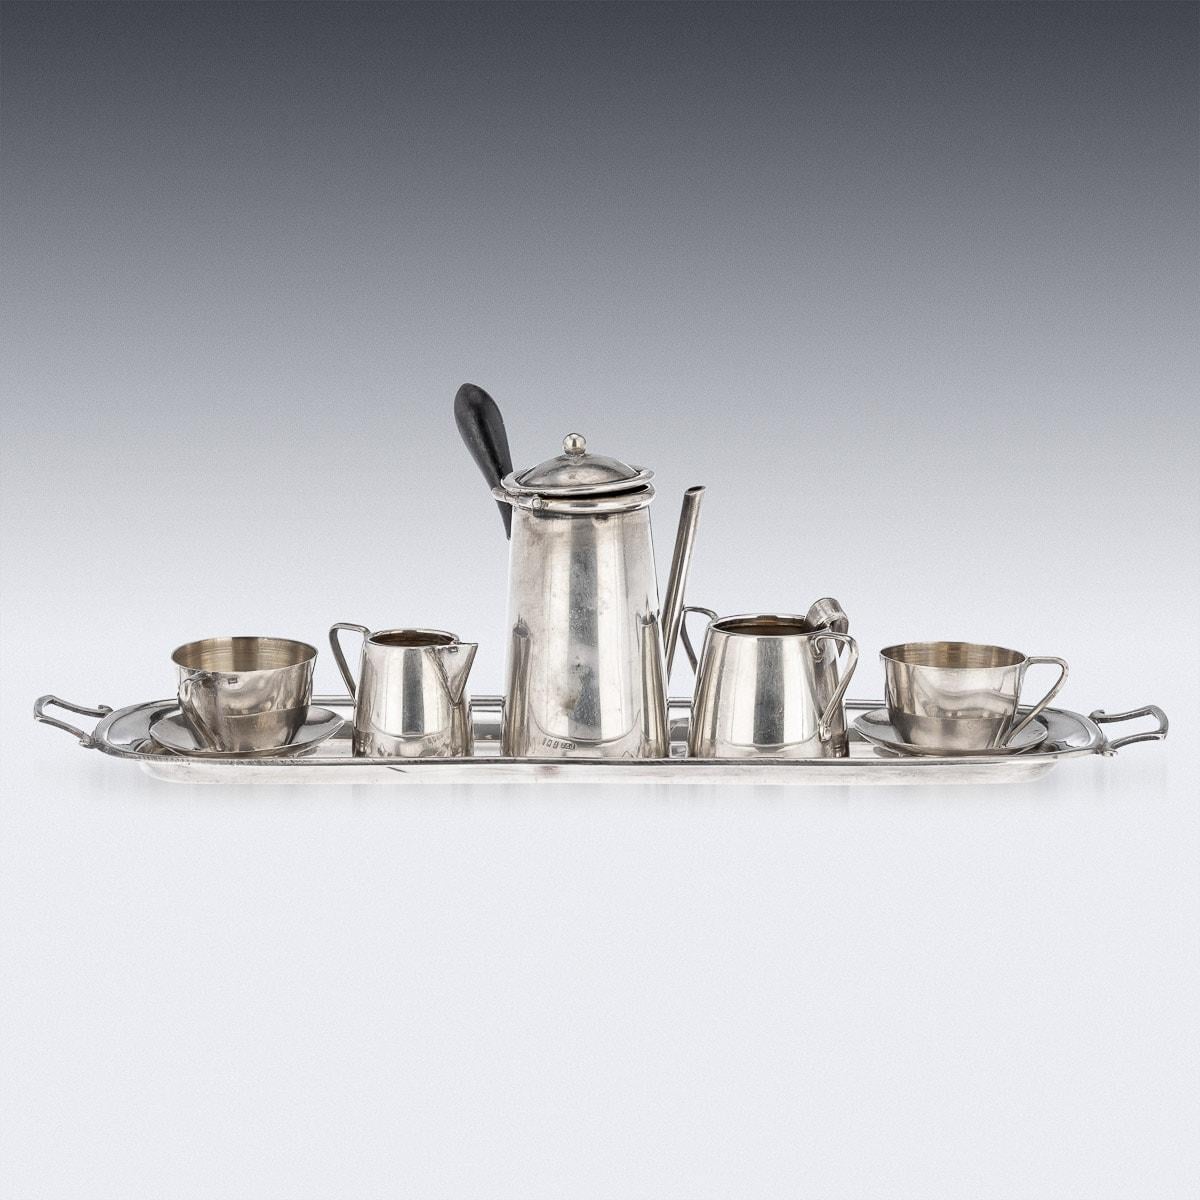 Antique early 20th Century English miniature solid silver seven piece coffee service, comprising of a coffee pot, sugar bowl, tongs, cream jug, and two cups with saucers and a serving tray. A very rare set used to decorate a table in a doll hous.